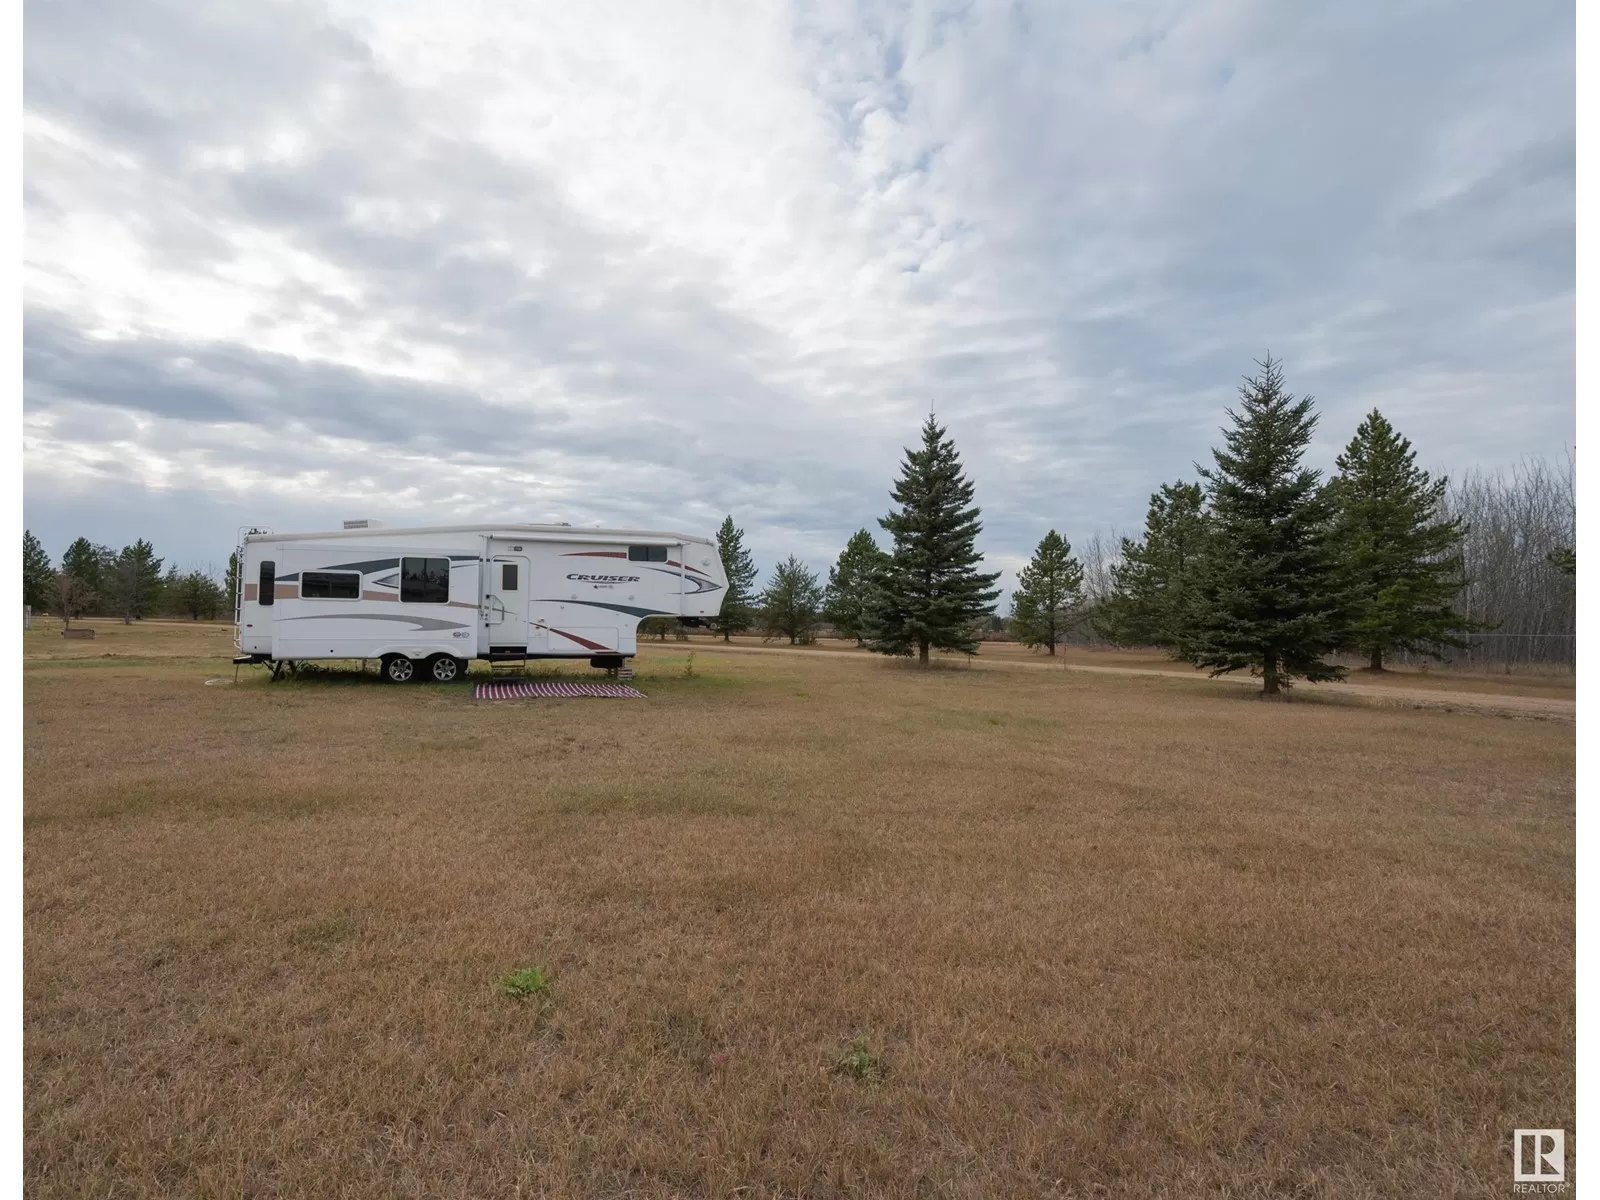 No Building for rent: 22 665059 Rge Rd 230, Rural Athabasca County, Alberta T9S 2A8